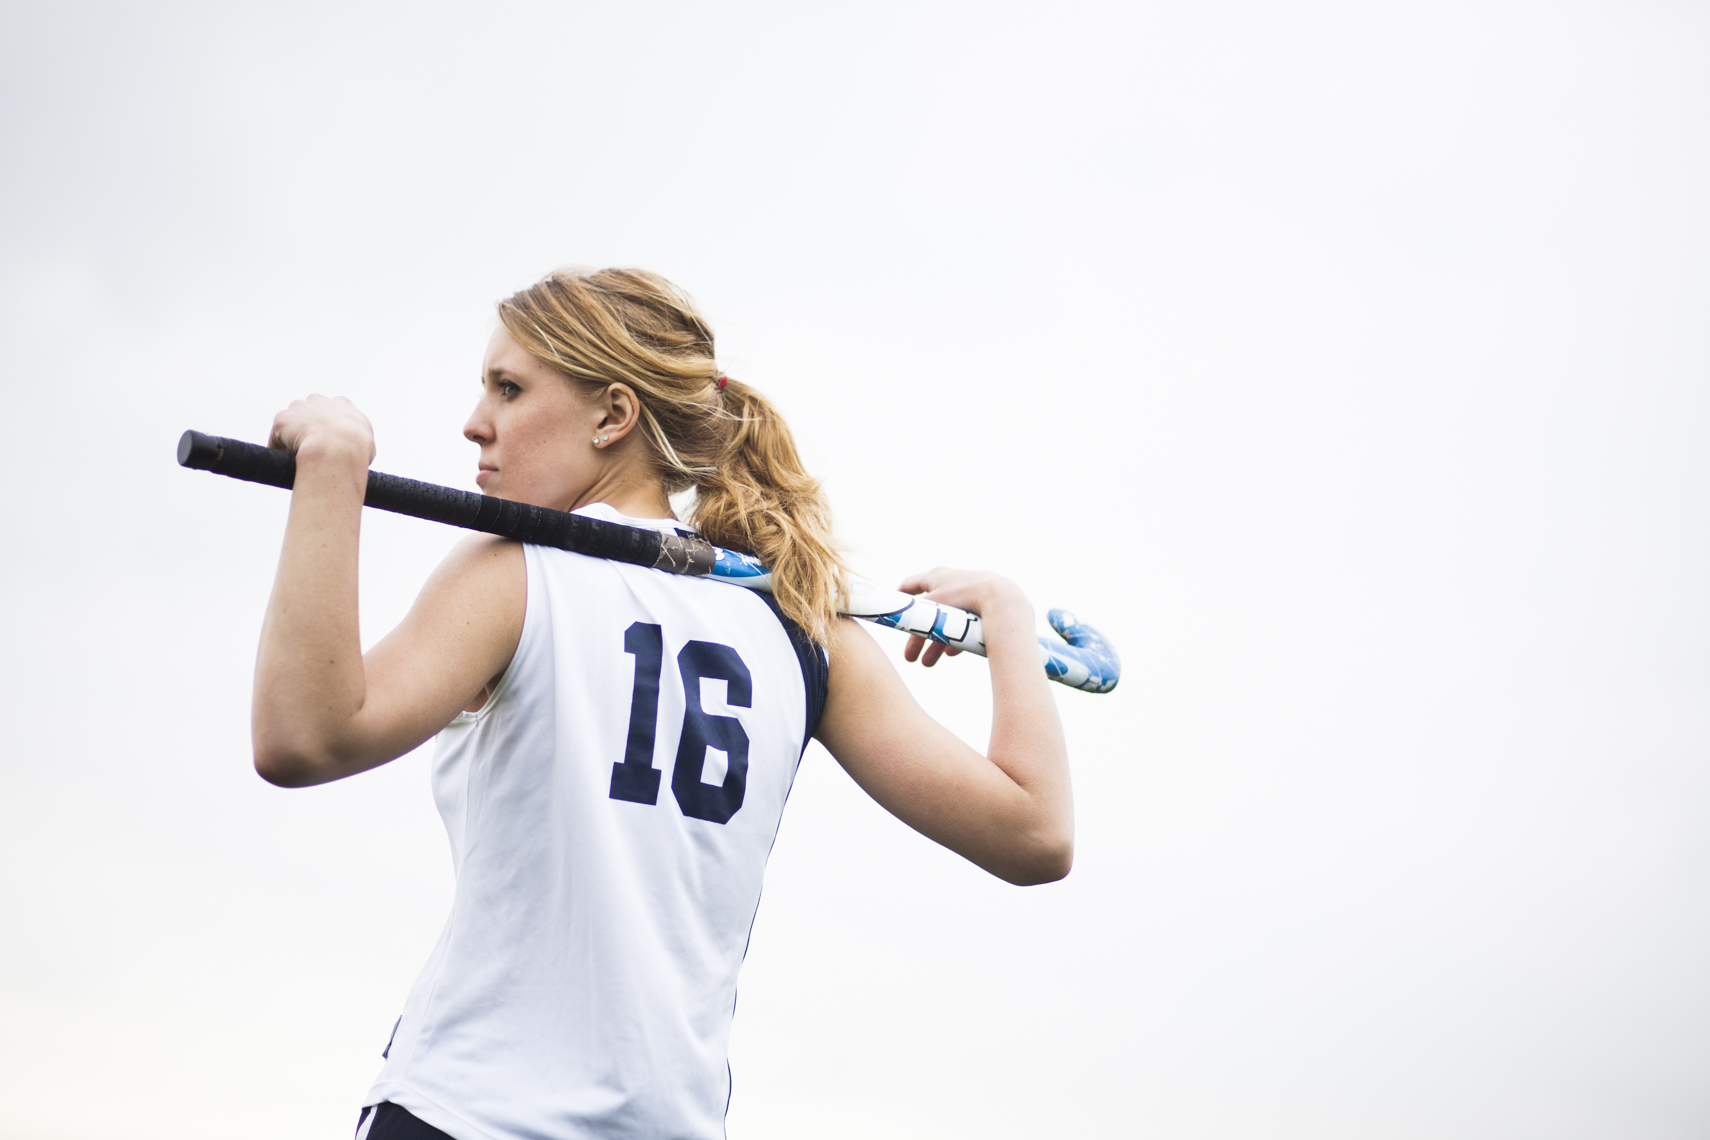 A college field hockey player rests in between plays in a photo by Ryan Donnell